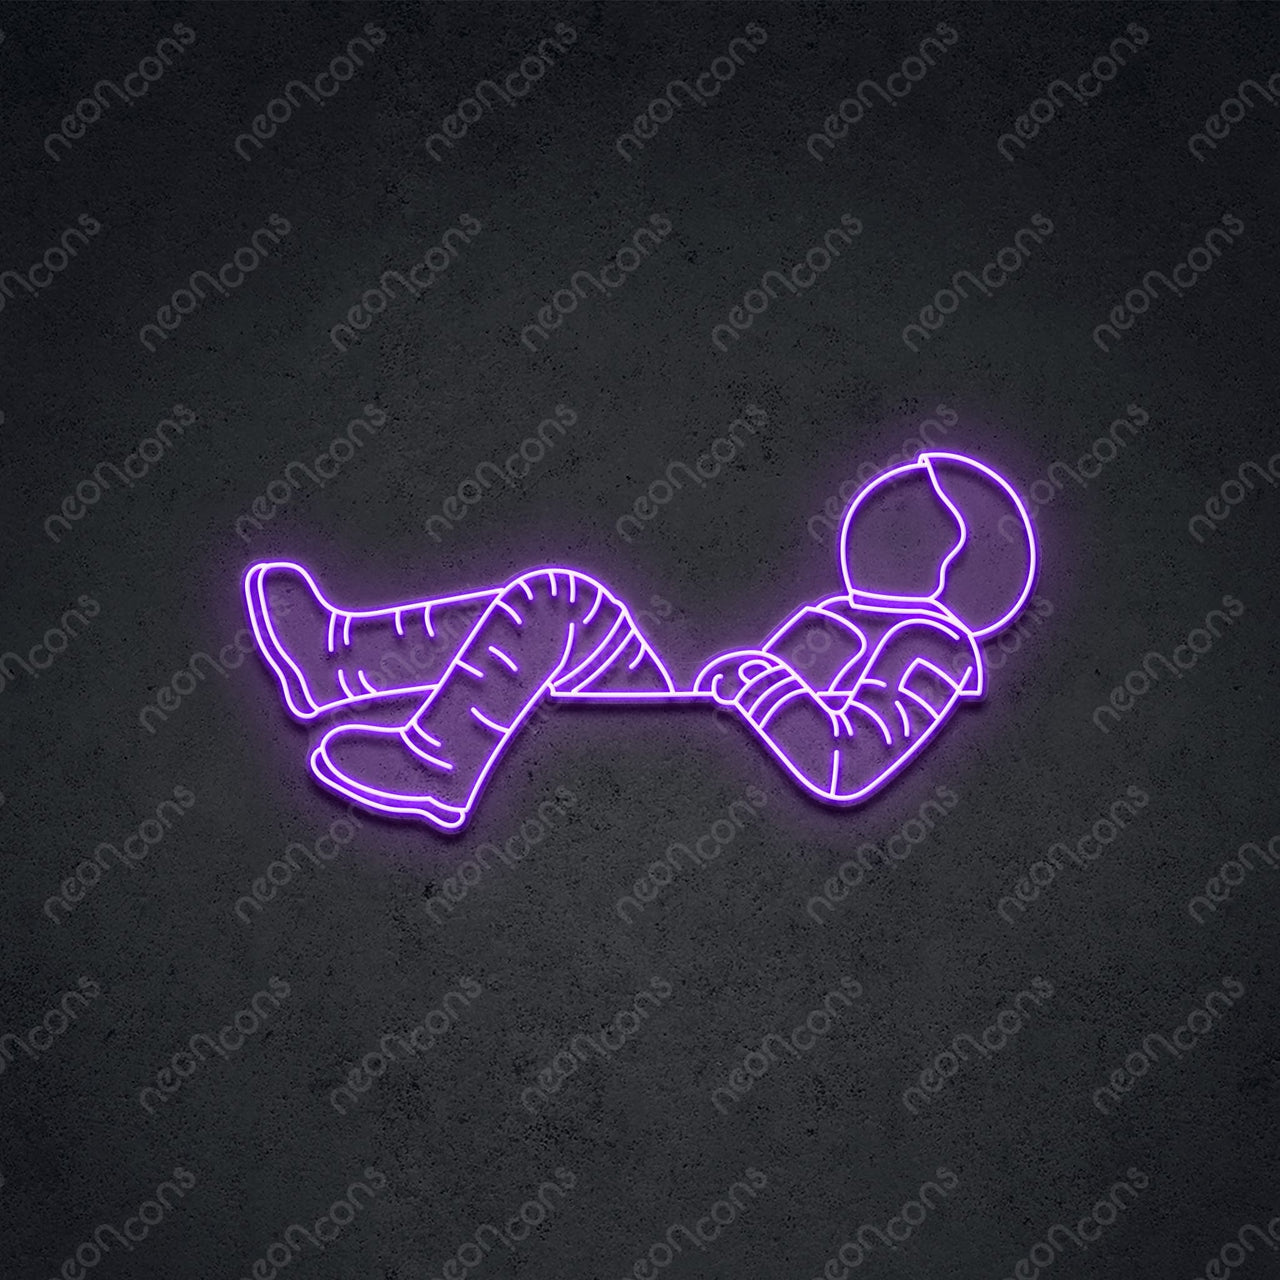 "Lost in Space" LED Neon Sign 60cm (2ft) / Purple / LED Neon by Neon Icons